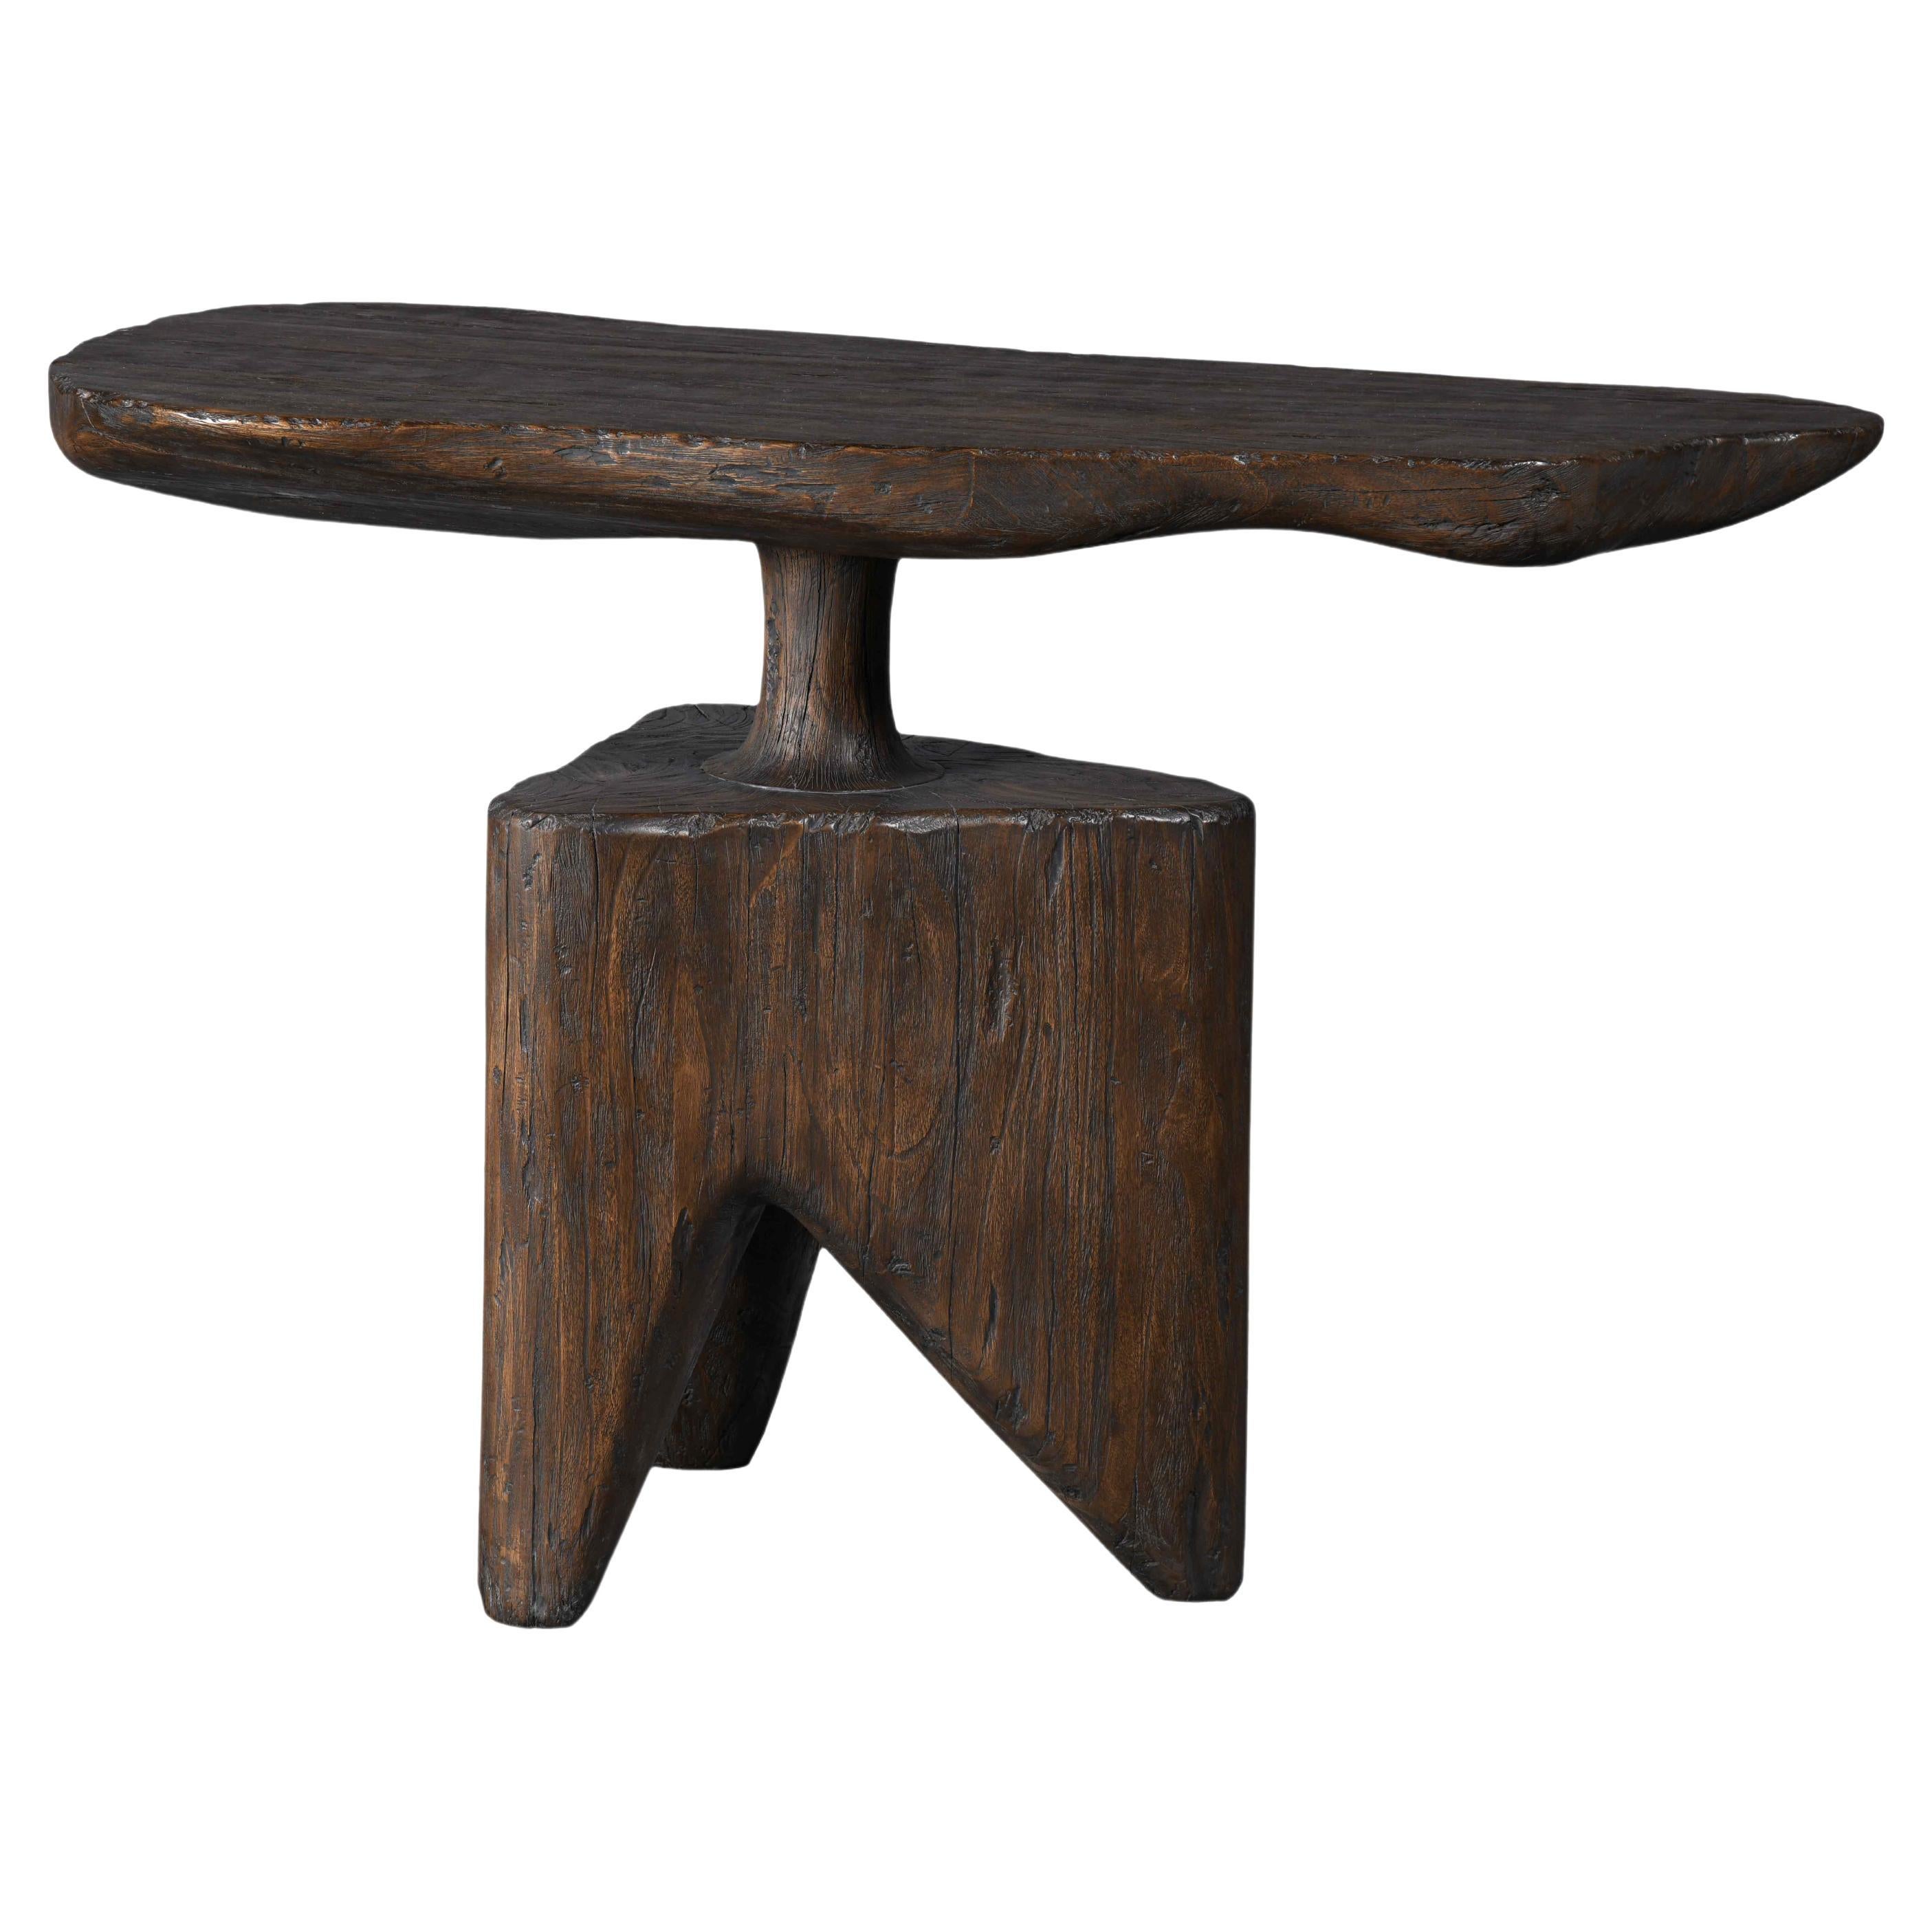 Wooden Belliet Console with 3 Standing Legs and Irregular Shapes, Rustic Finish